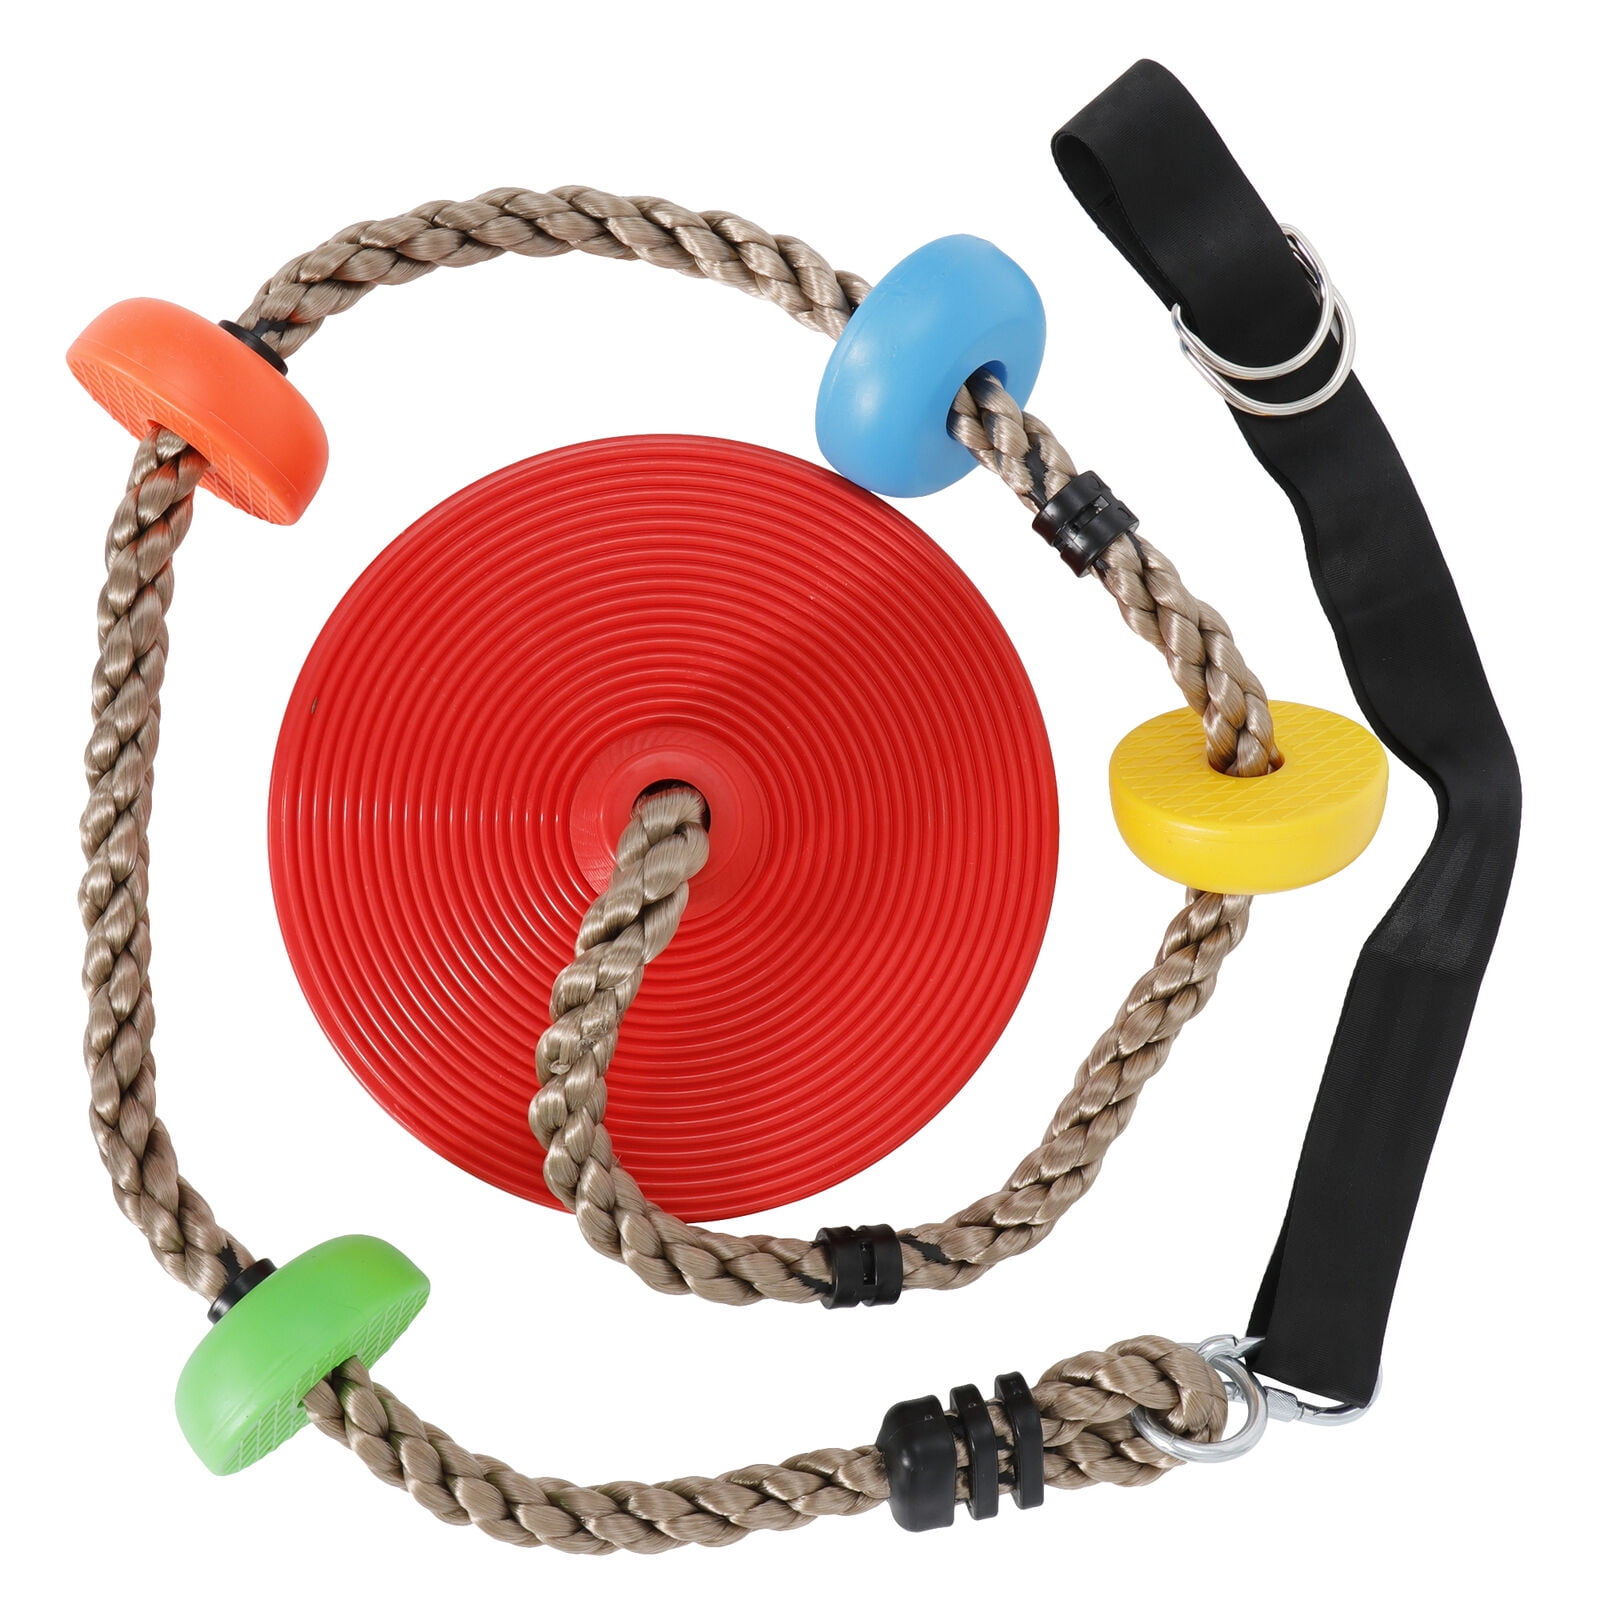 Details about   Climbing Rope with Platform & Disc Tree Swing Seat Set Fun For Kids Outdoor 